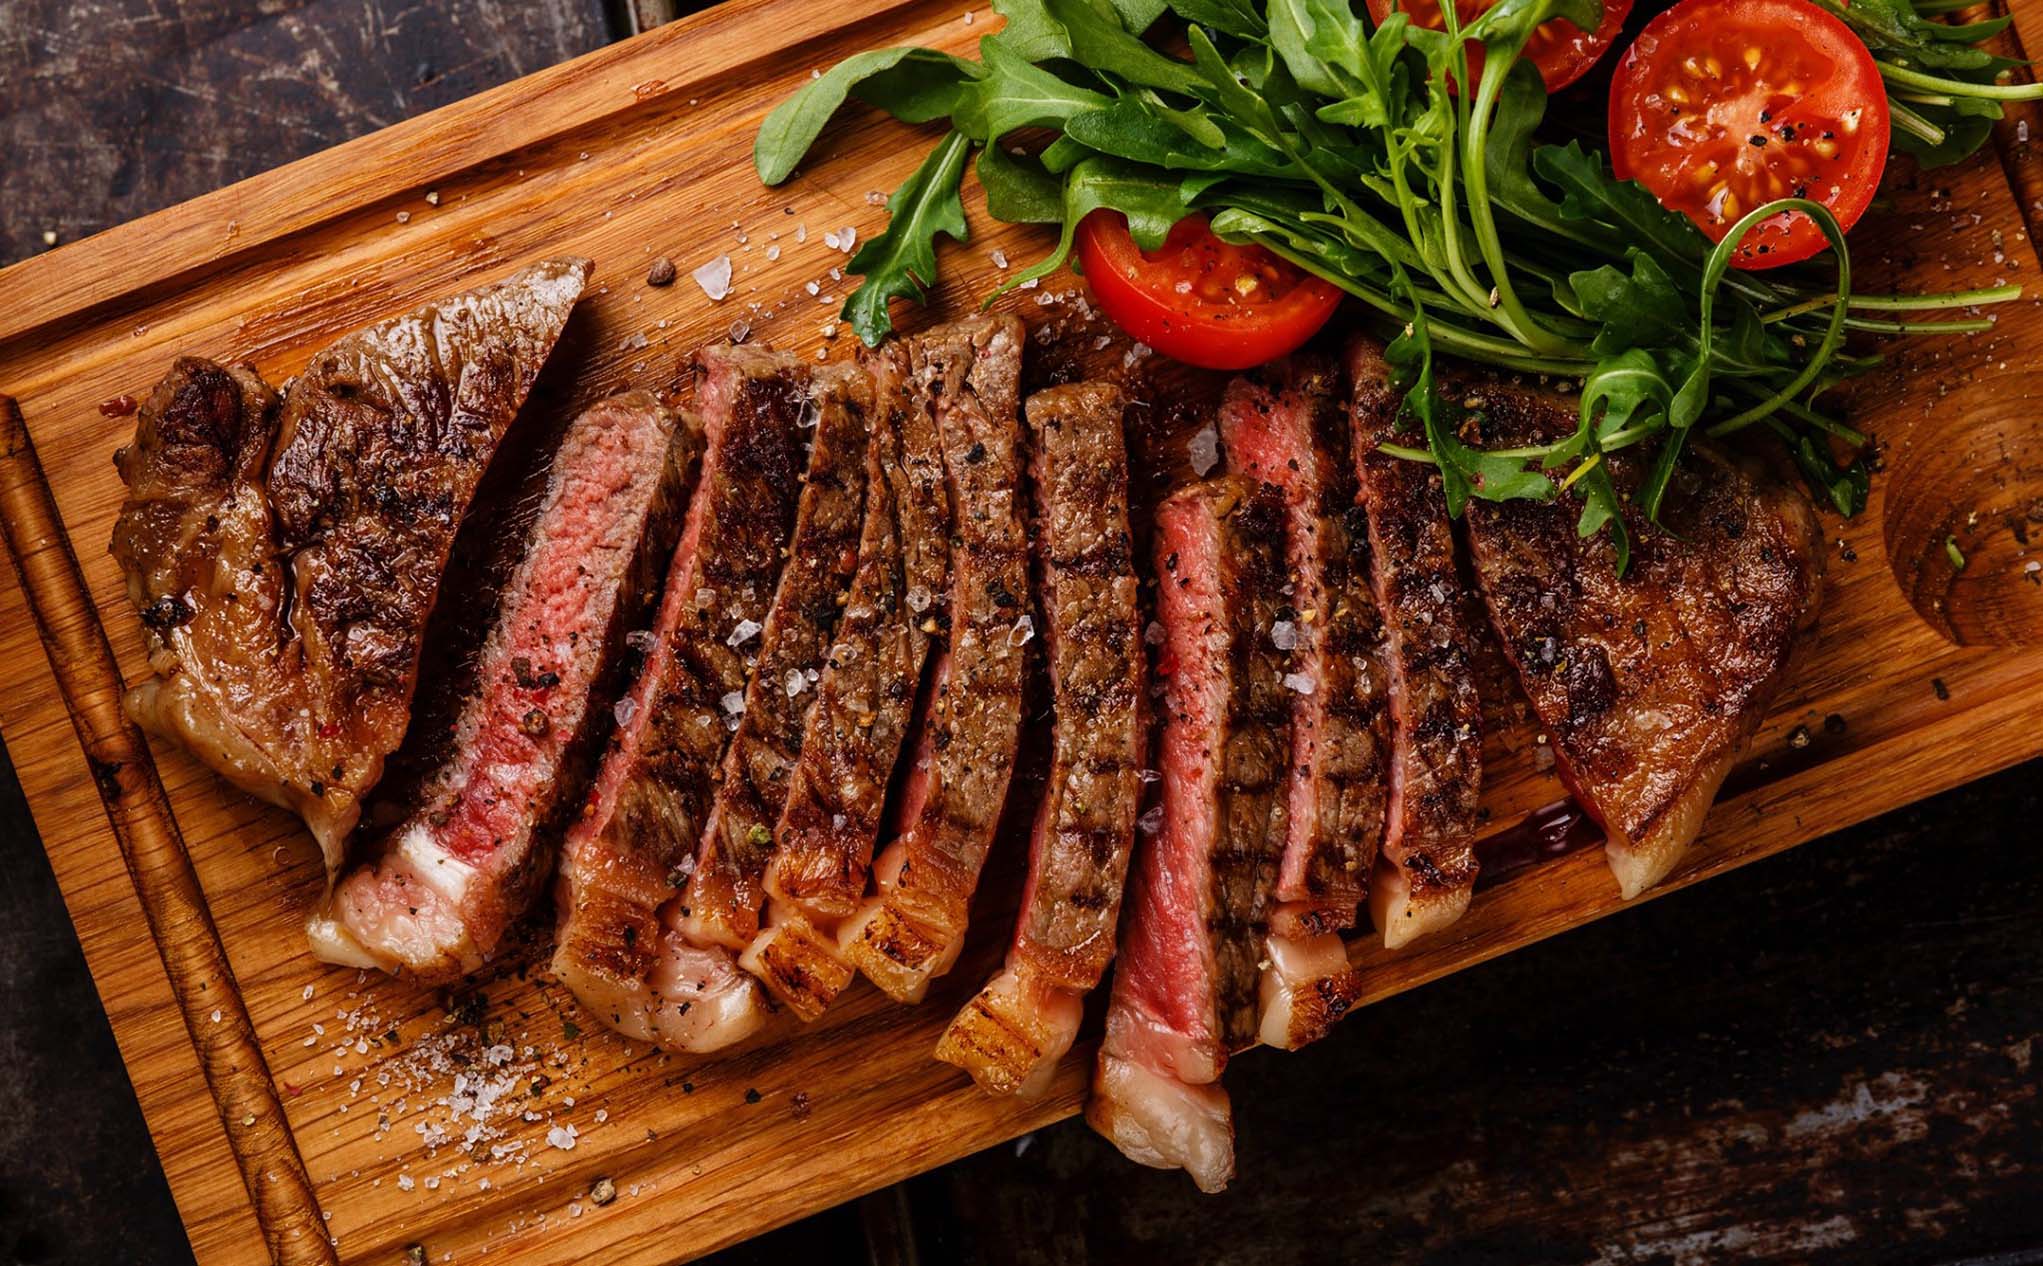 B3 Steakhouse & Craft Beer, a place for meat and beer lovers, offers top-quality cuts, expertly grilled